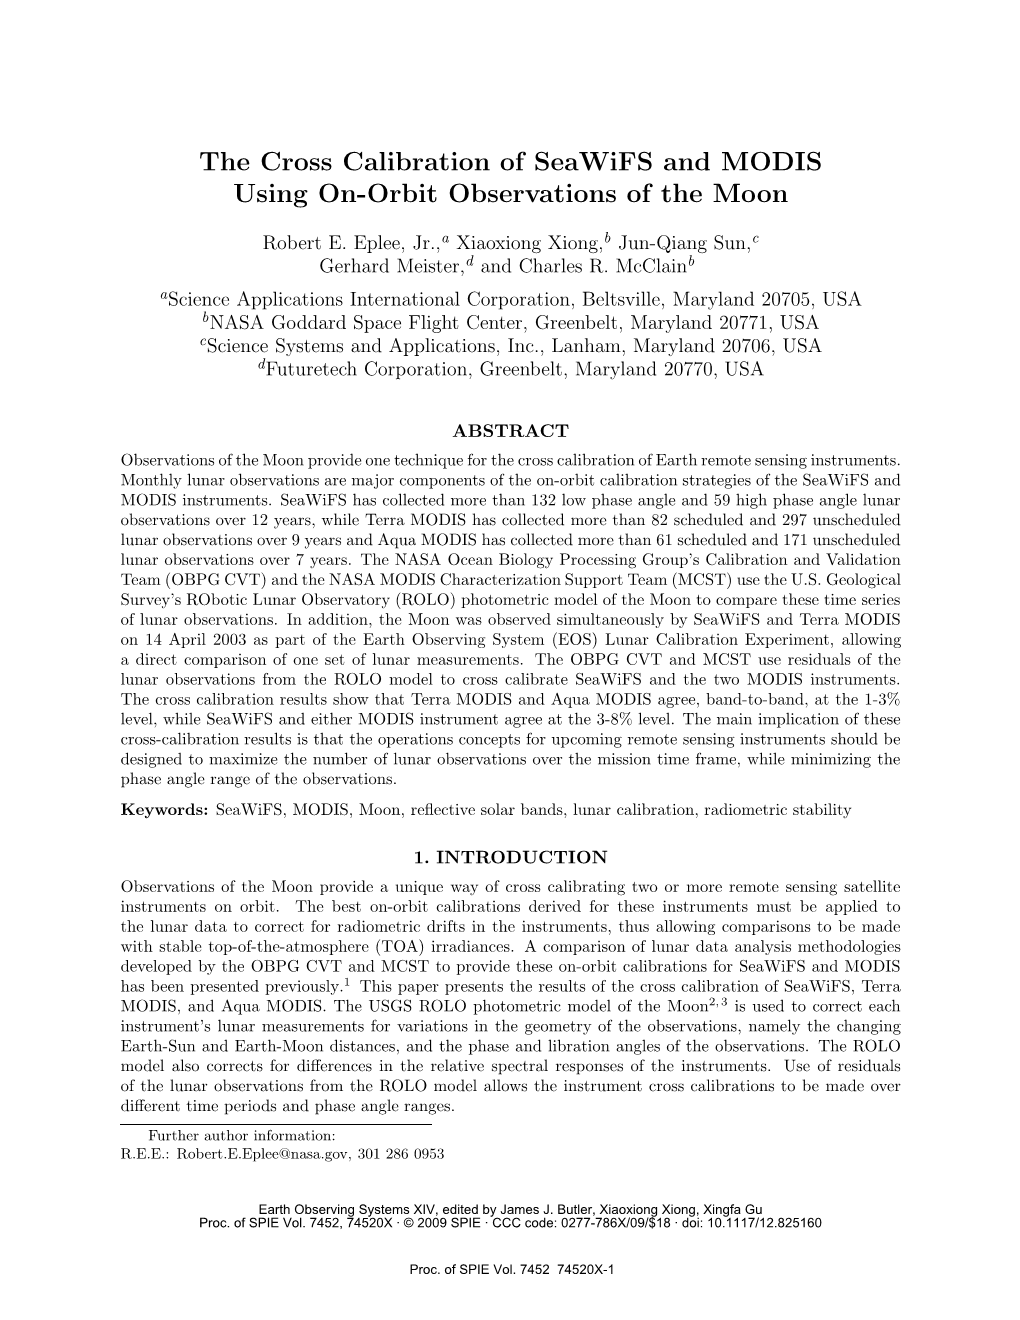 The Cross Calibration of Seawifs and MODIS Using On-Orbit Observations of the Moon